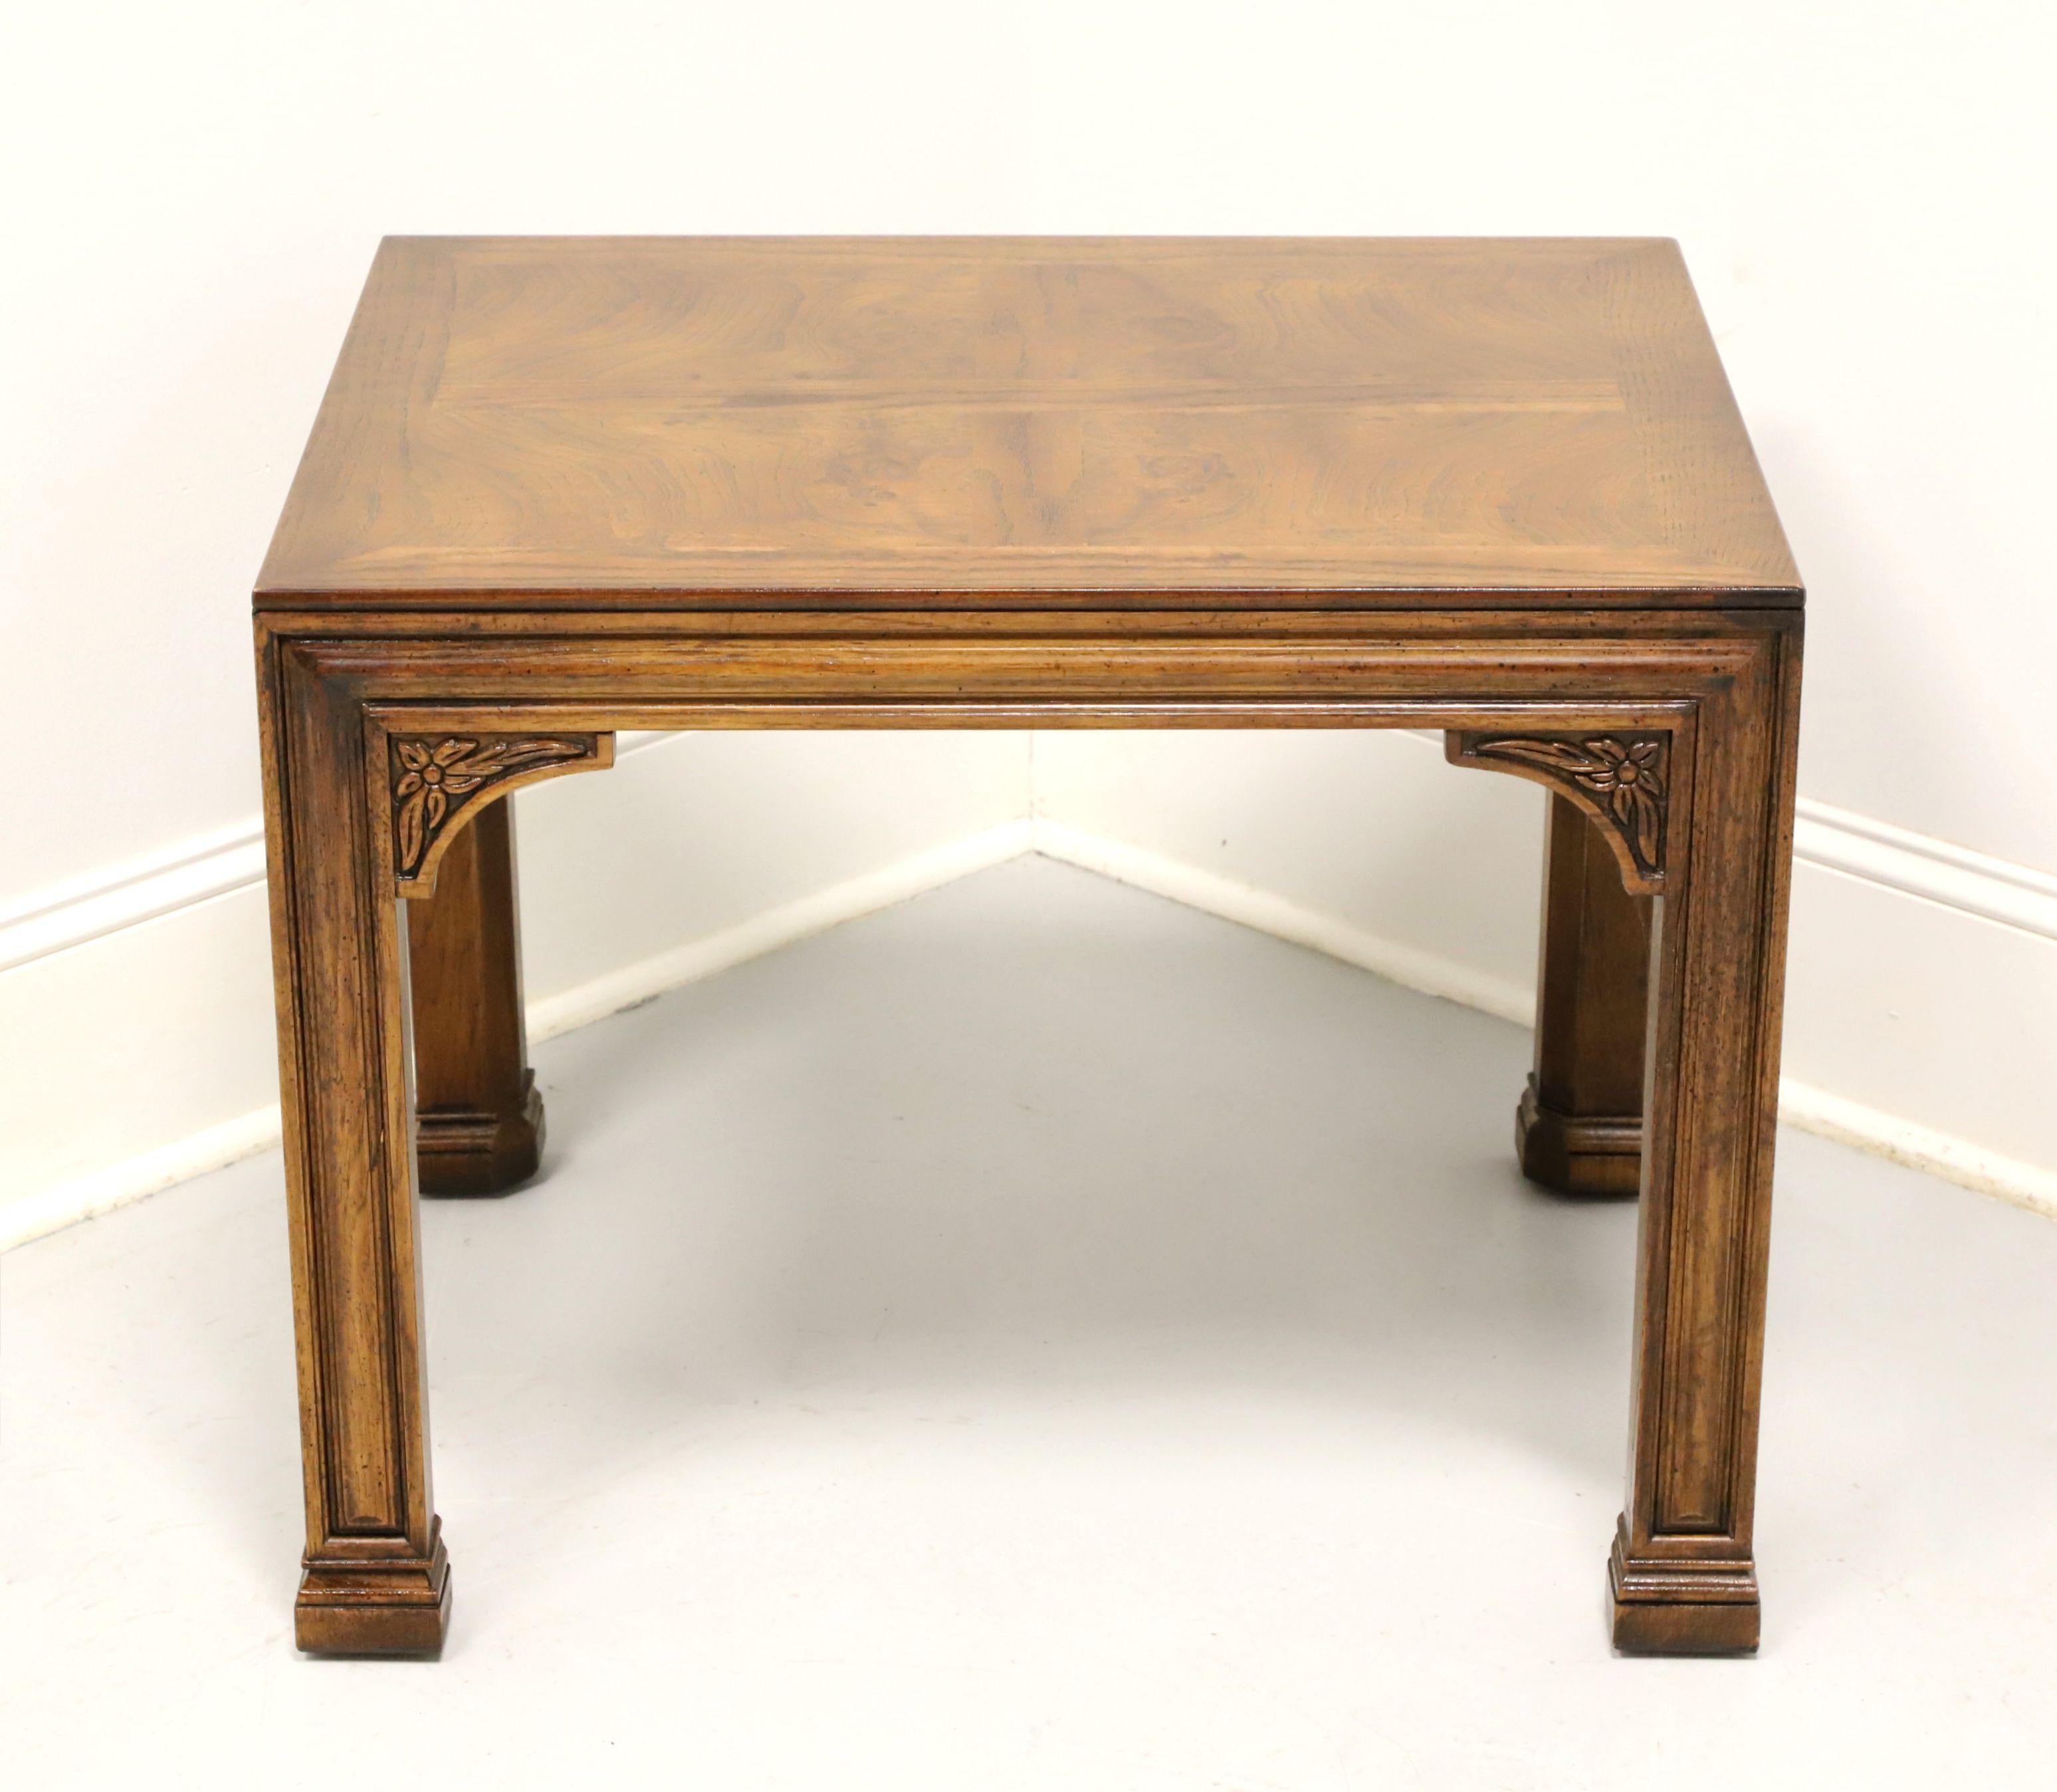 A French influenced rectangular end table by Henredon. Oak with burl oak parquetry design to top, carved apron, decoratively carved corner joints, square straight legs, and block feet. Made in Morganton, North Carolina, USA, circa 1983.

Style #: 41